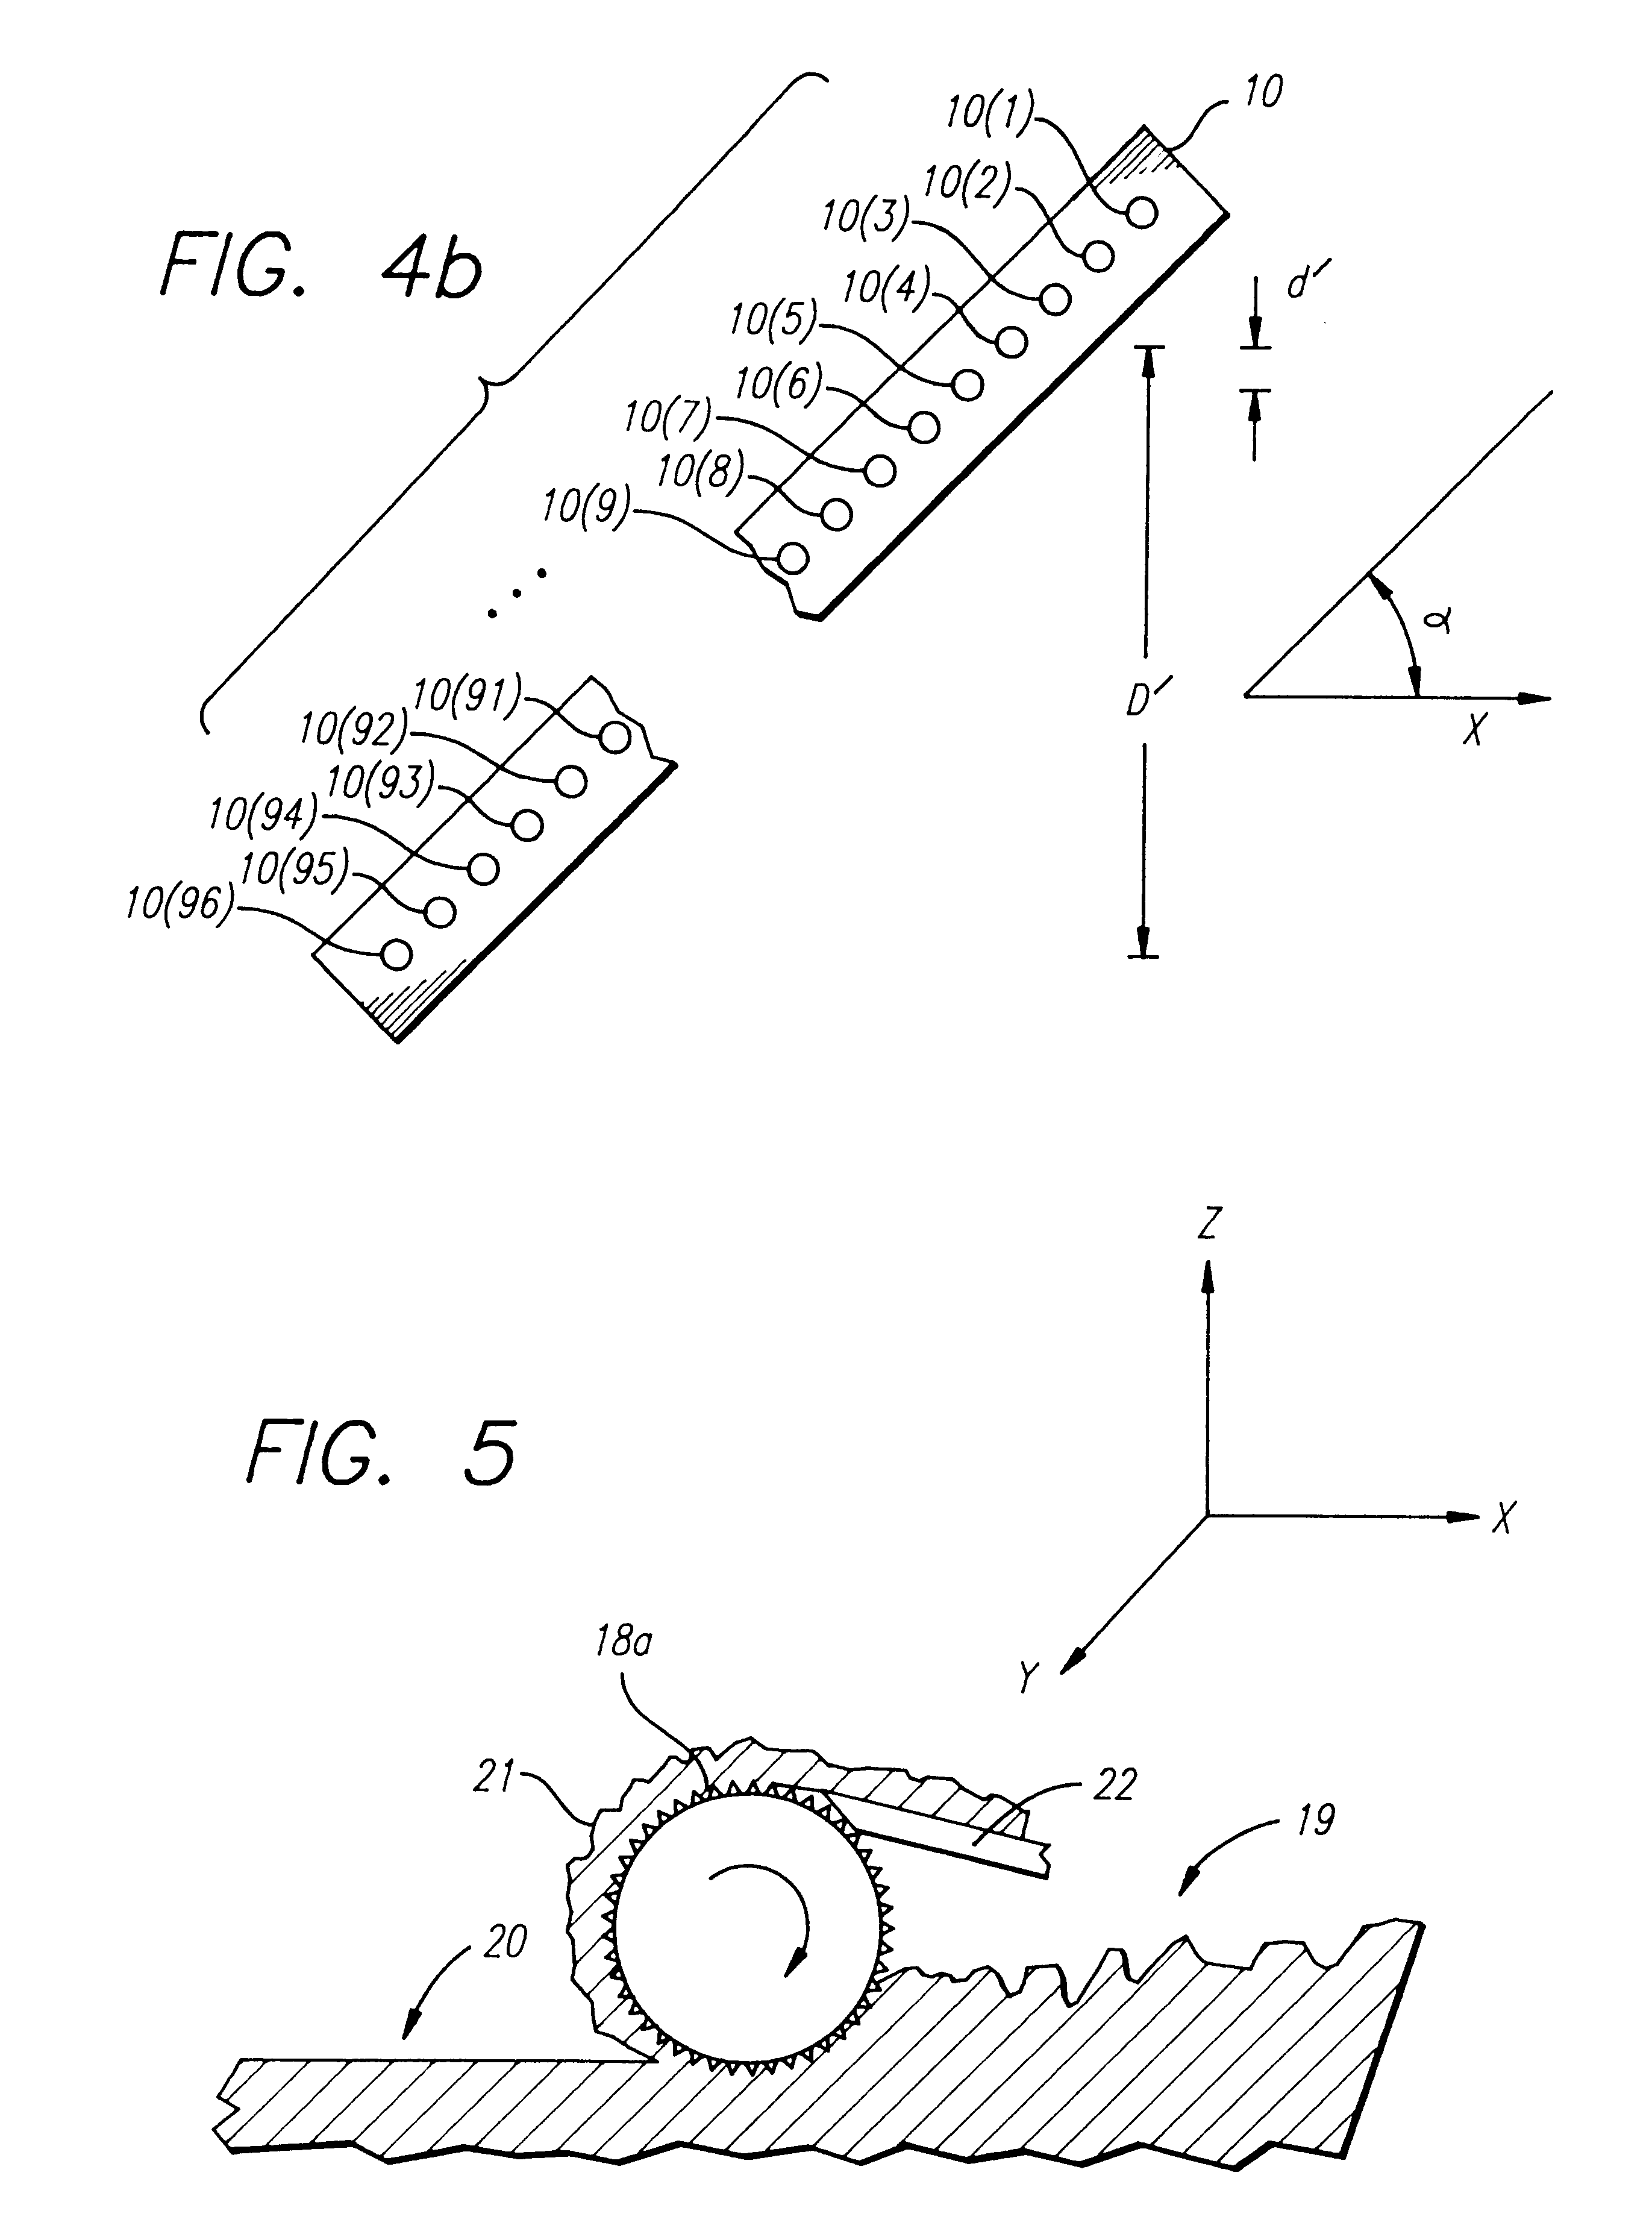 Selective deposition modeling method and apparatus for forming three-dimensional objects and supports